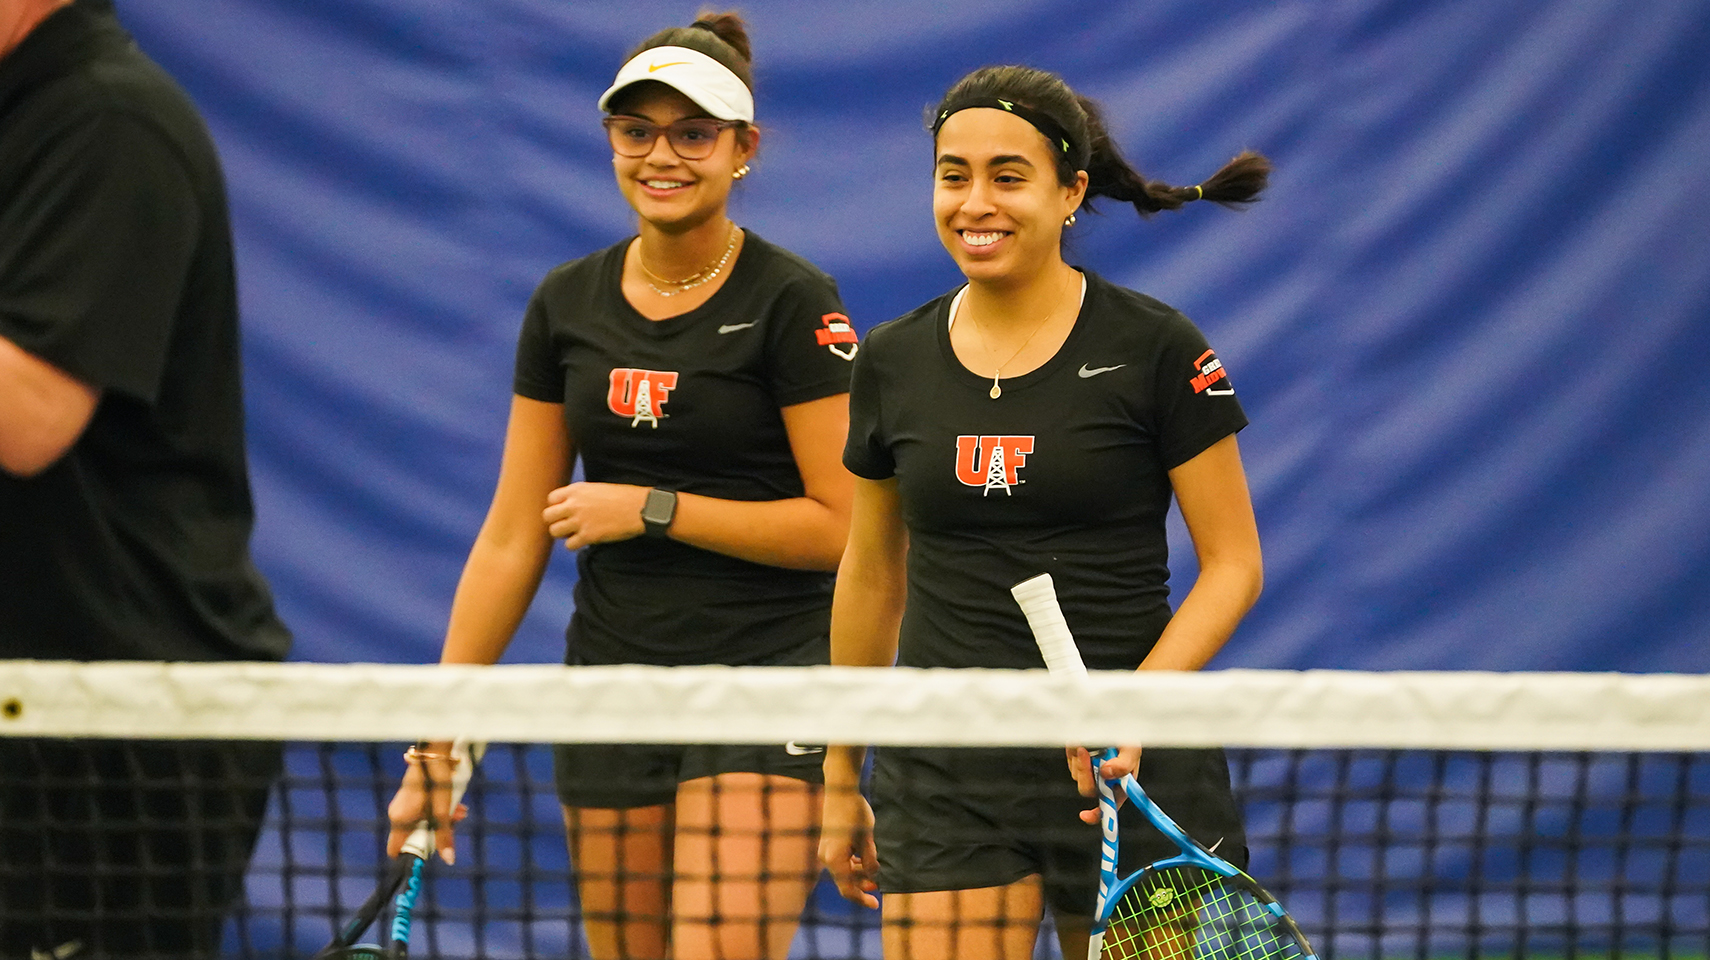 Women's tennis players in black smiling